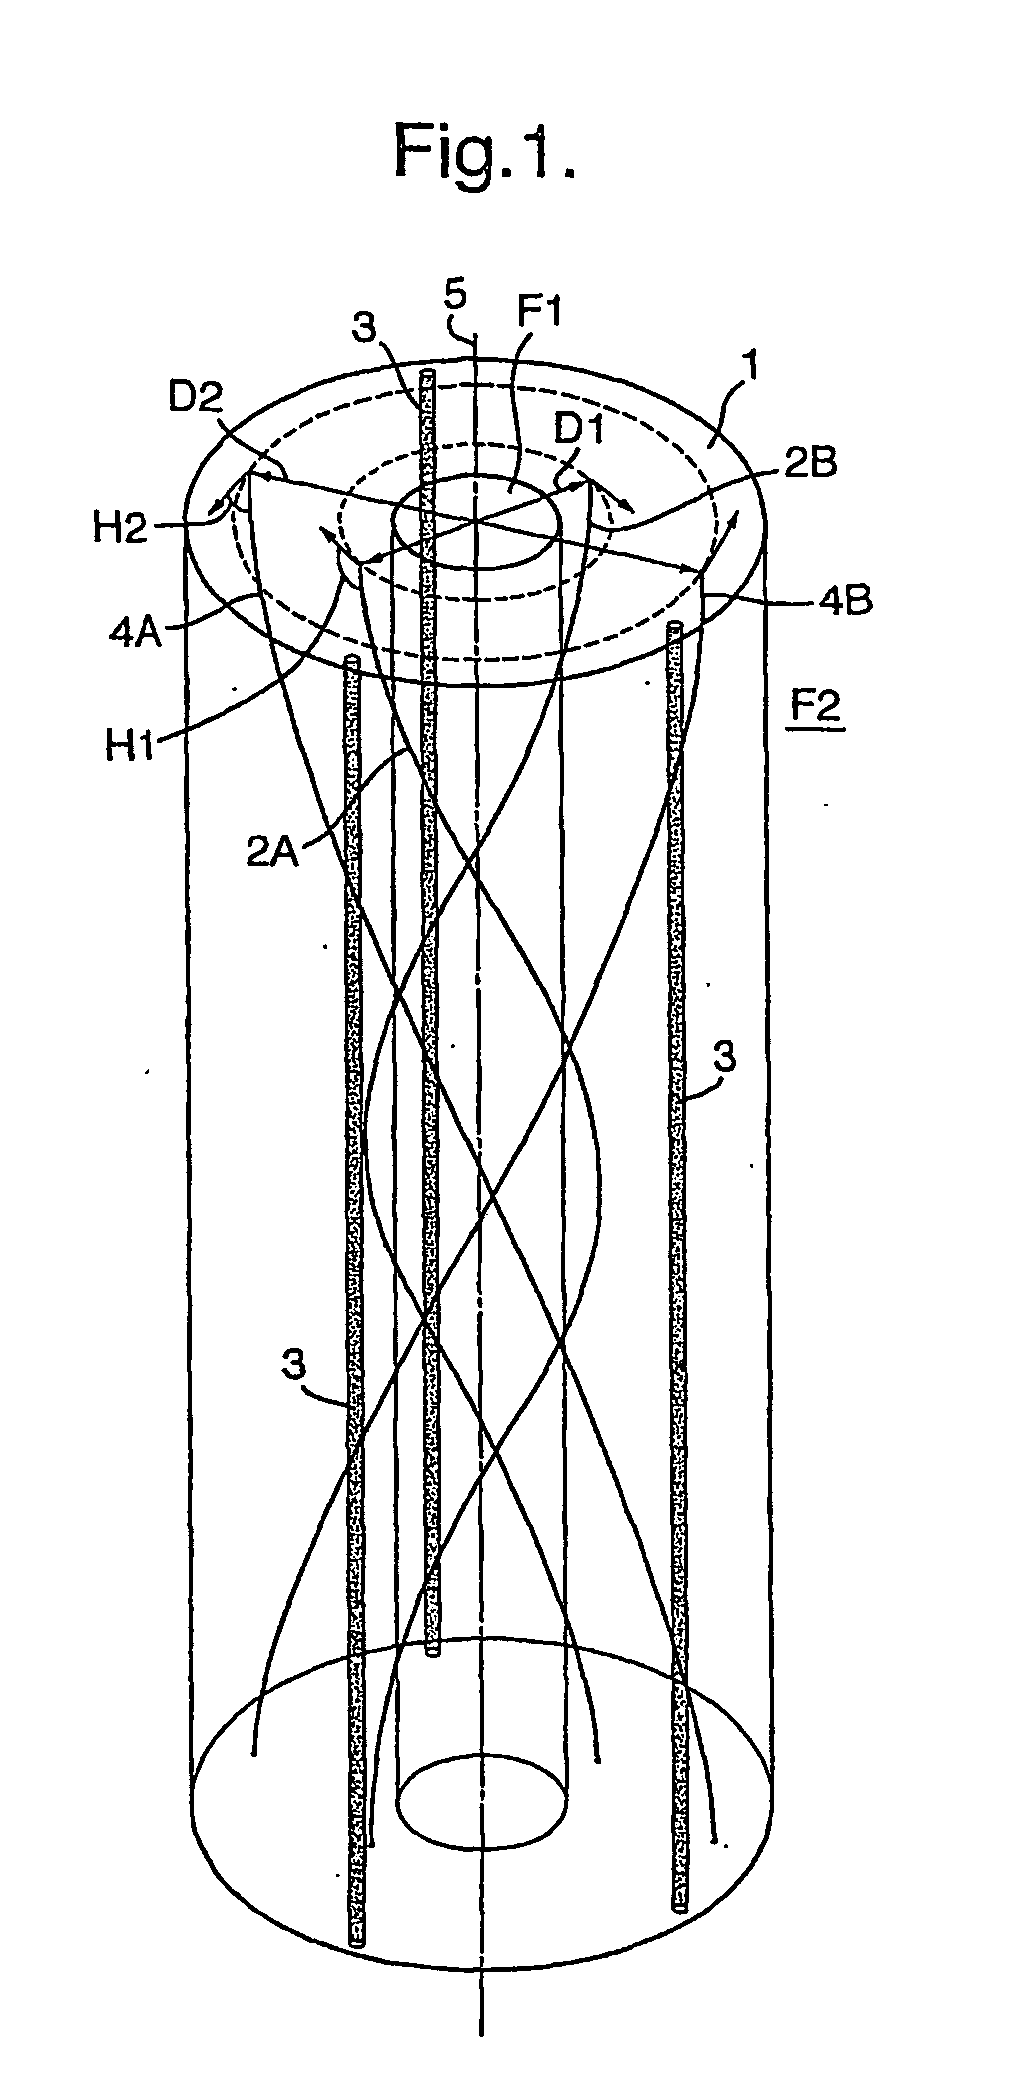 Coiled optical fiber assembly for measuring pressure and/or other physical data